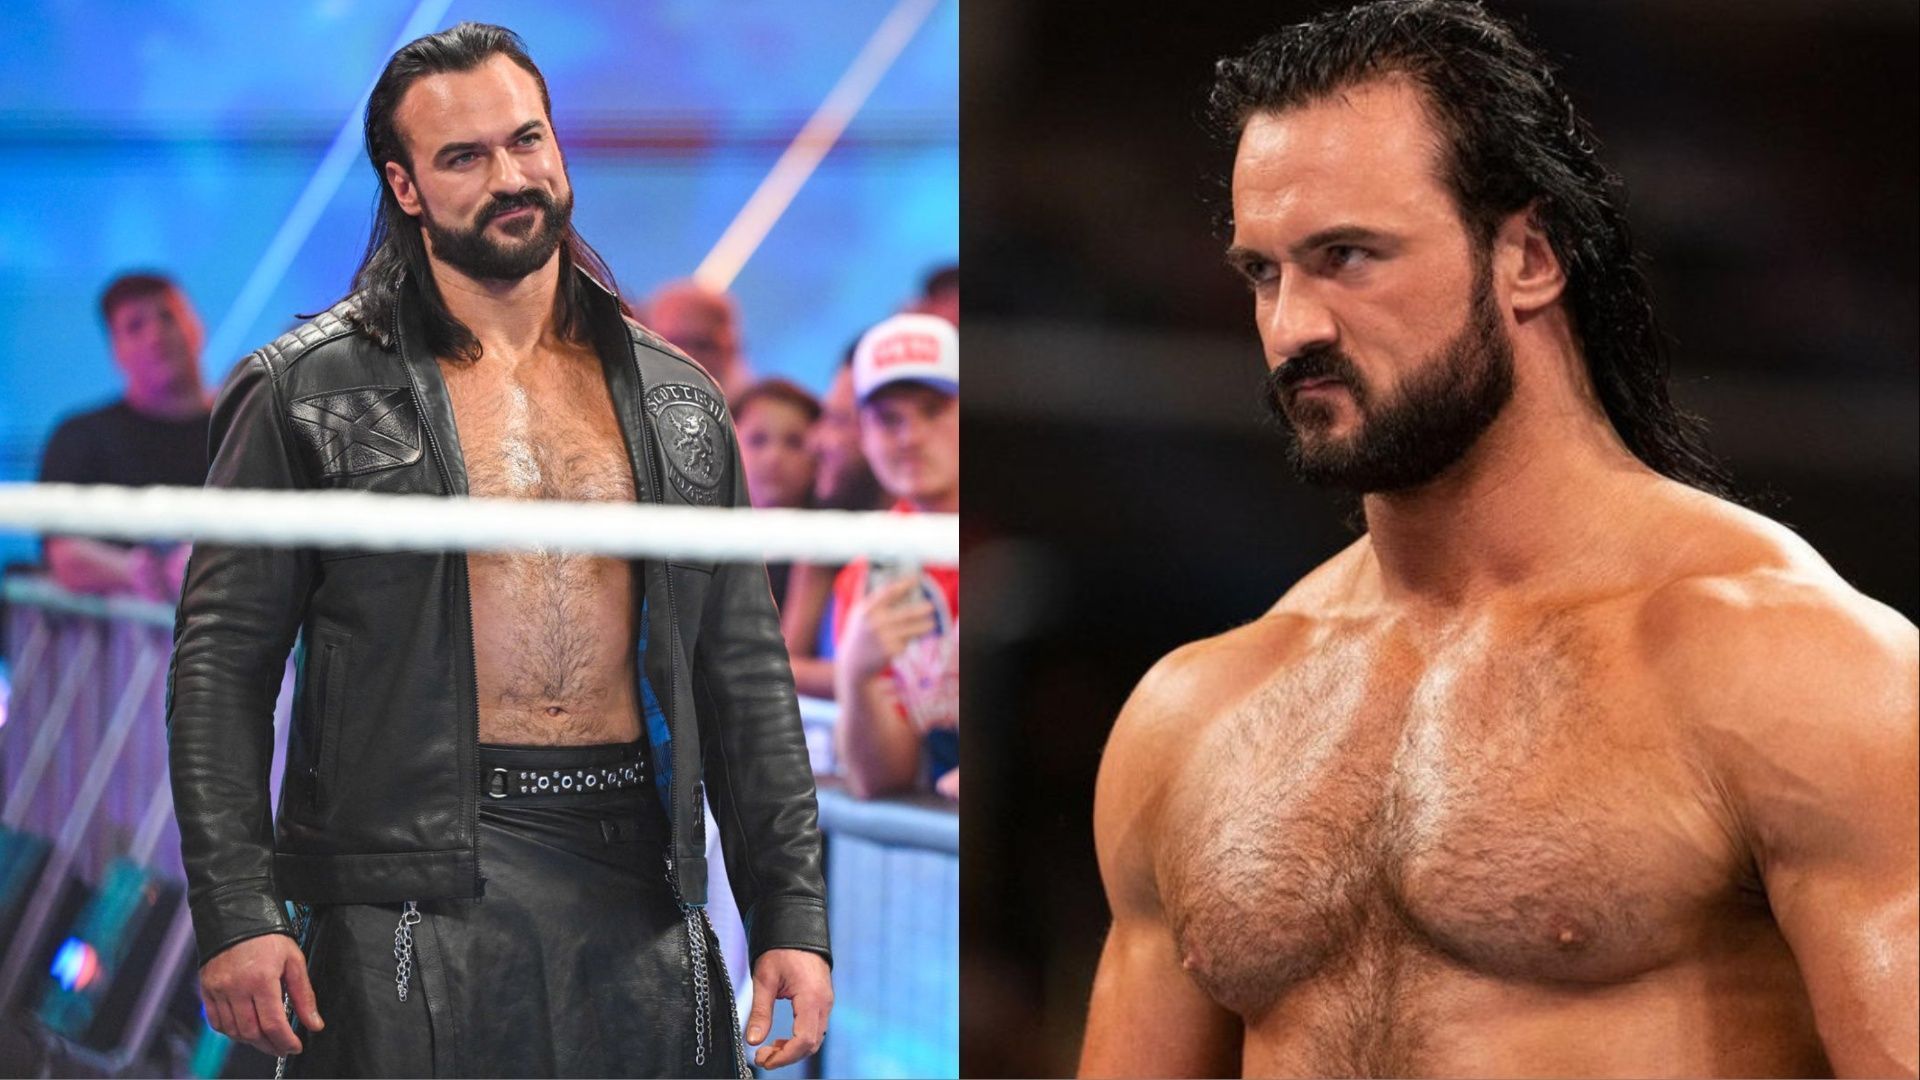 Drew McIntyre is set to challenge for the world title at Crown Jewel 2023.